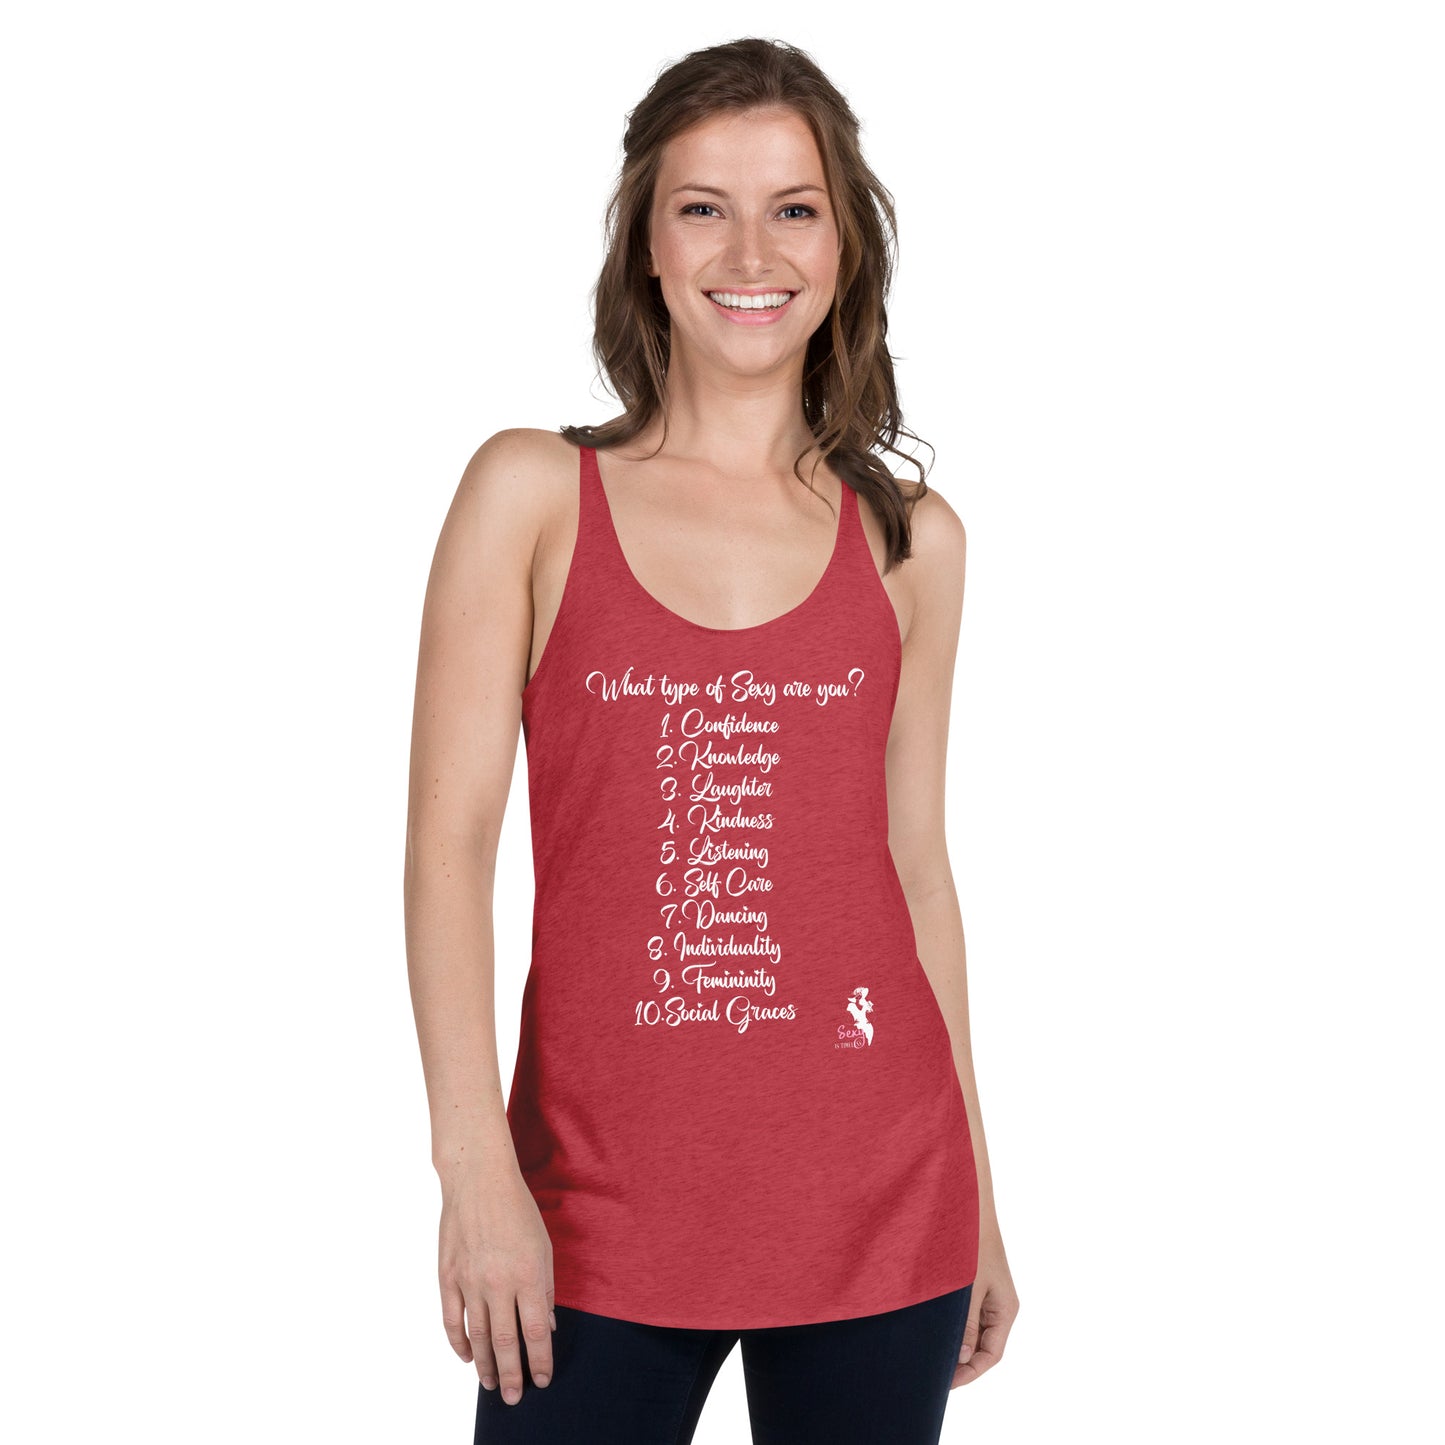 Women's Racerback Tank - What type of sexy are you? - Colors